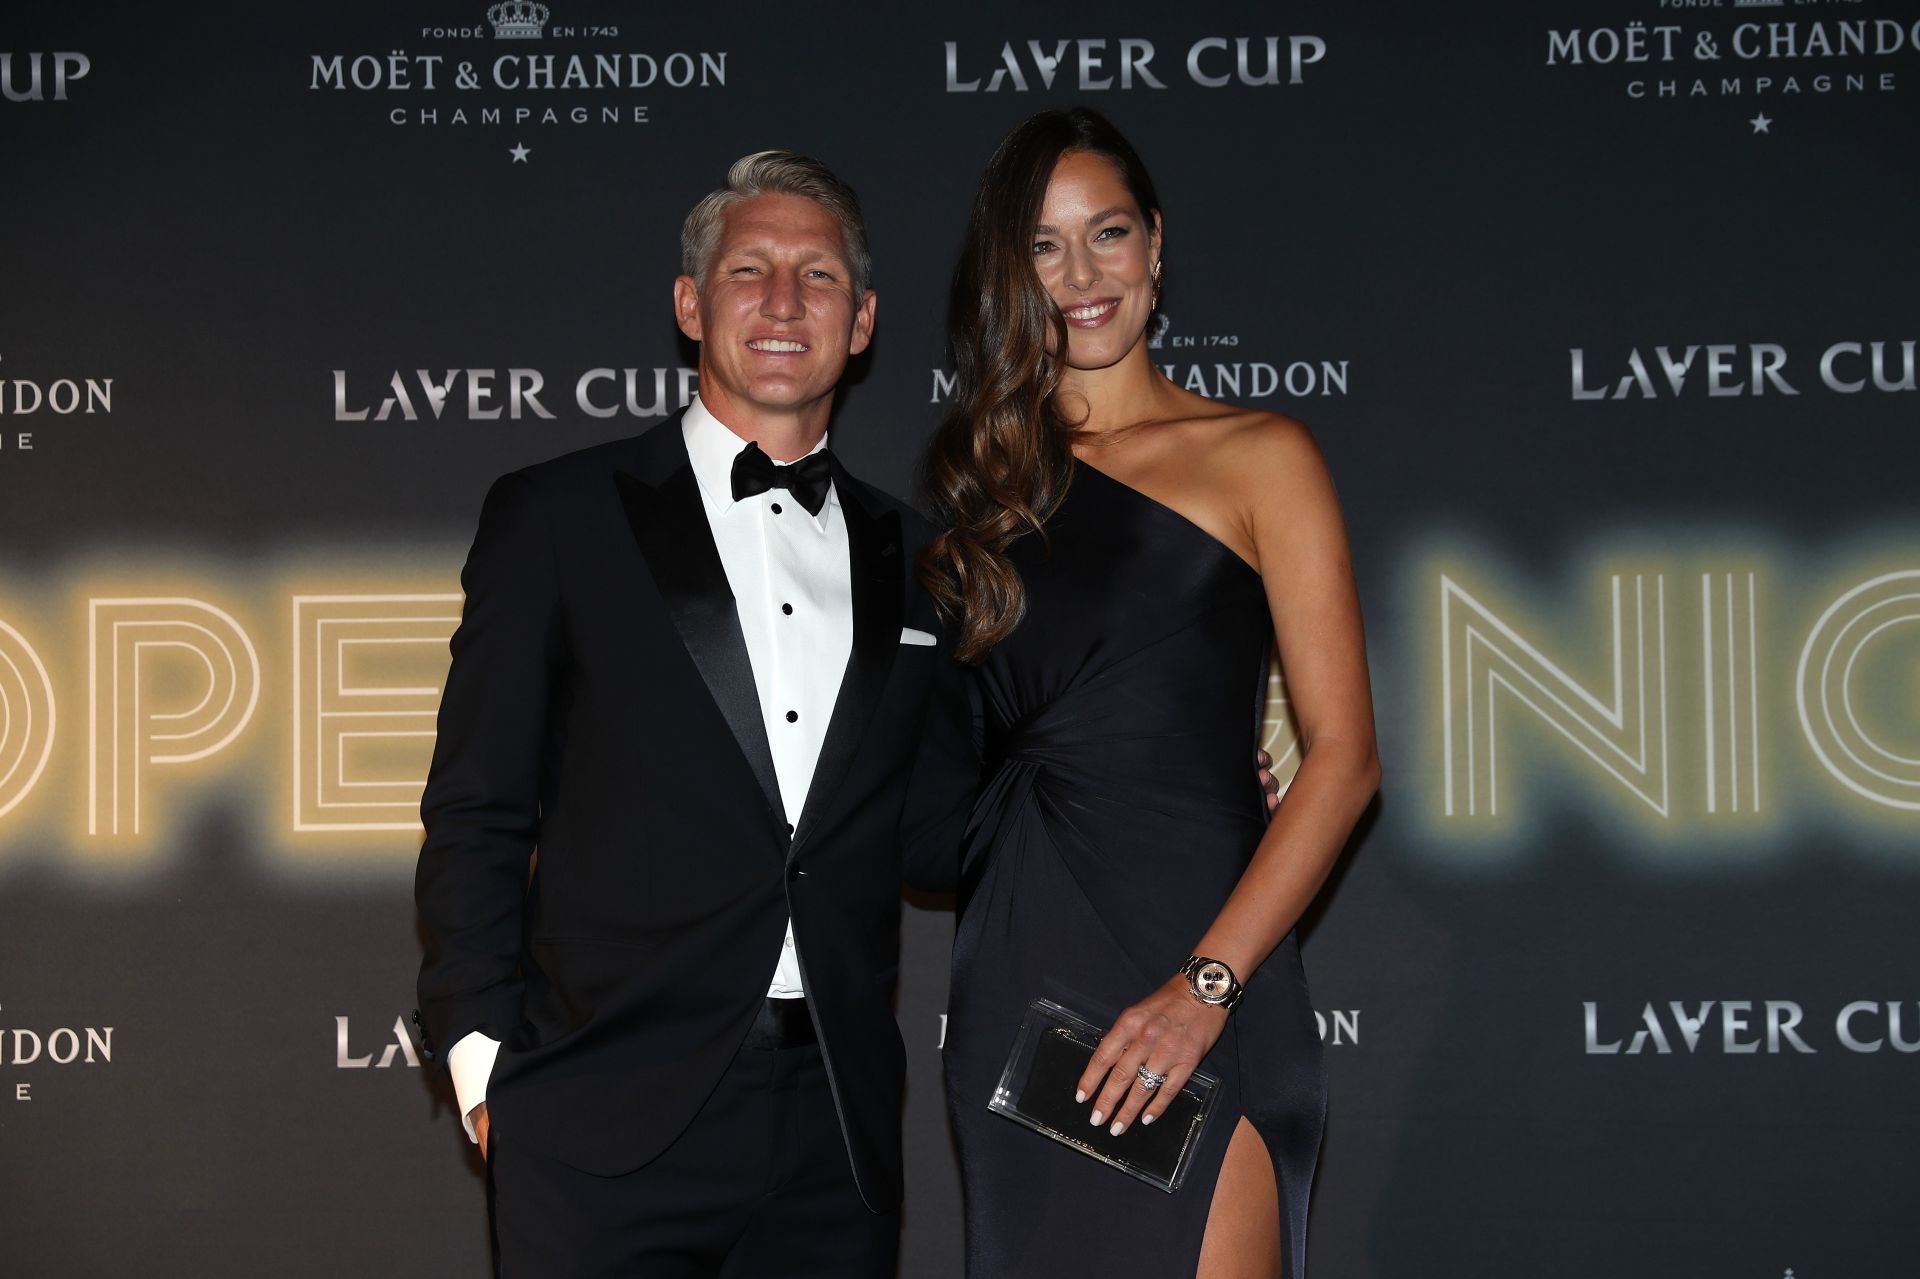 Schweinsteiger and Ivanovic in Laver Cup Opening Night